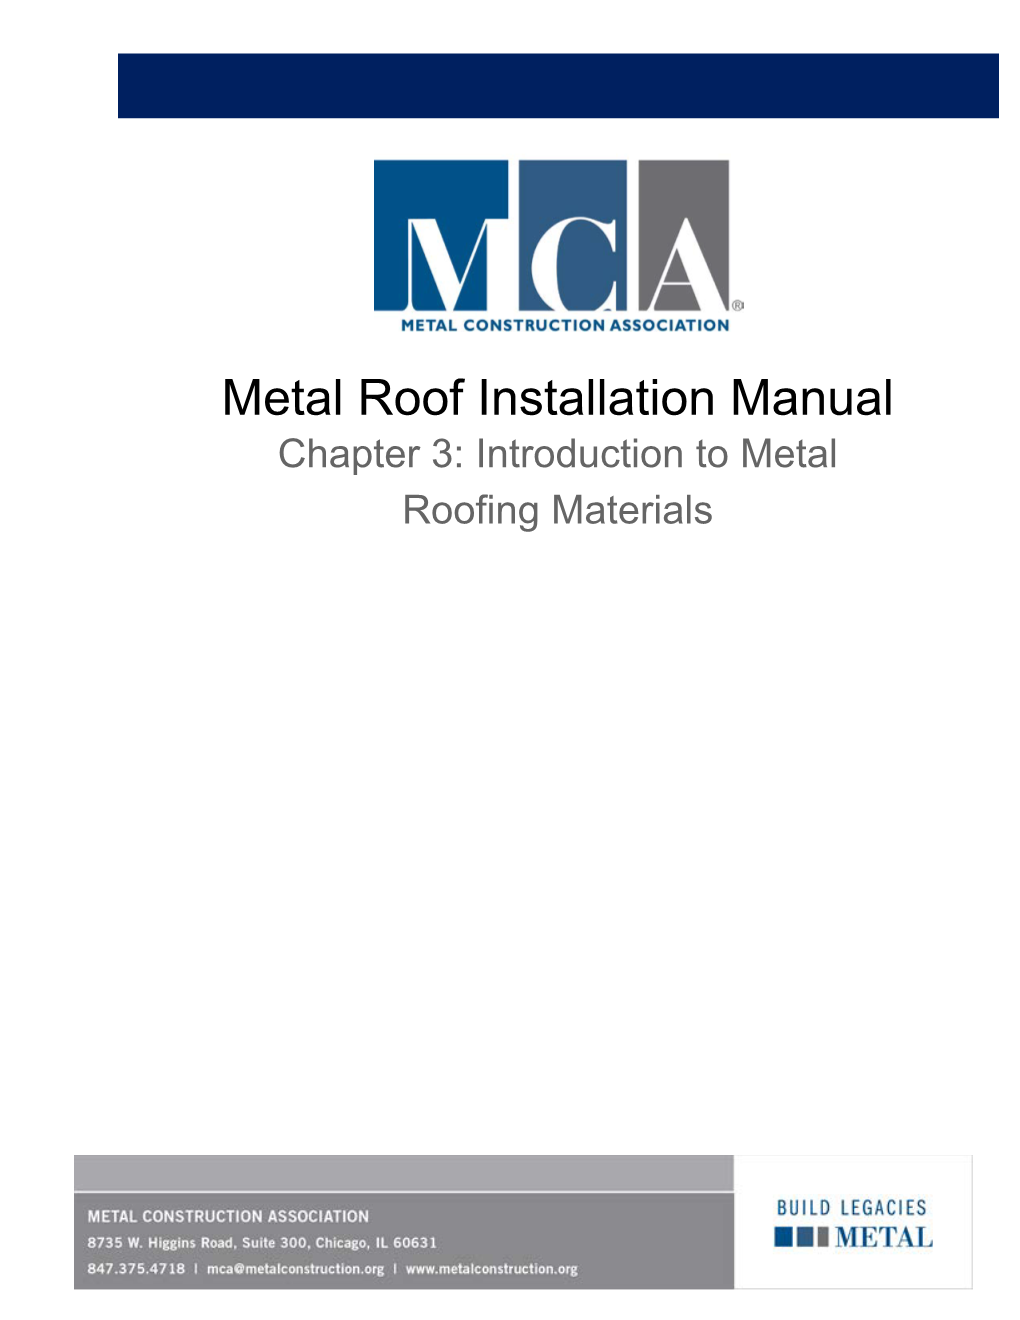 Chapter 3: Introduction to Metal Roofing Materials Chapter 3: Introduction to Metal Roofing Materials Chapter Contents 3